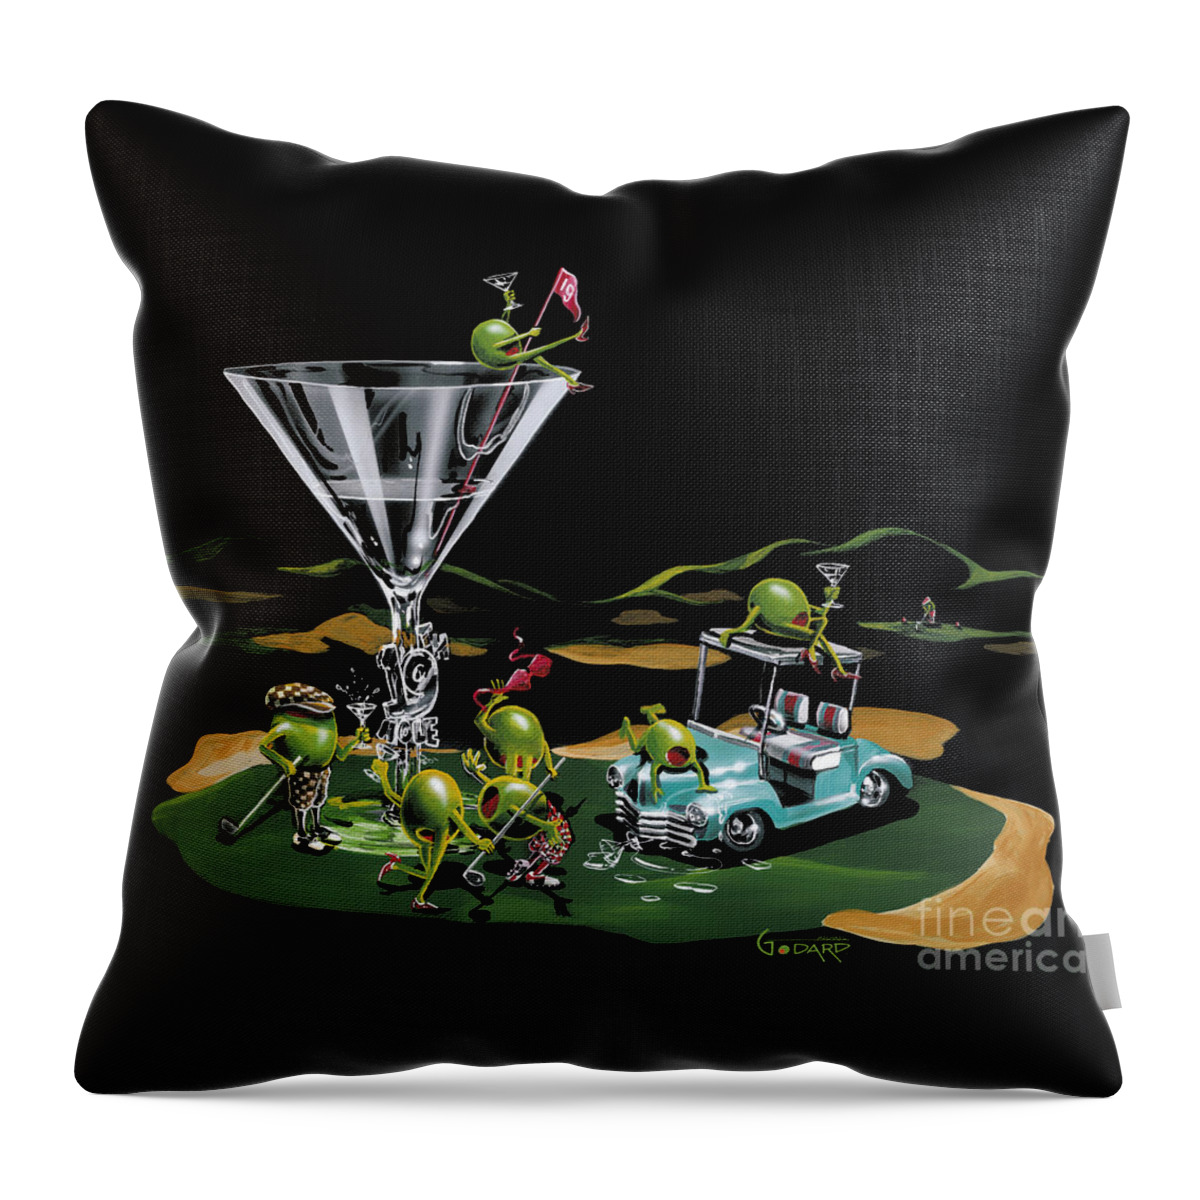 Golf Throw Pillow featuring the painting 19th Hole by Michael Godard